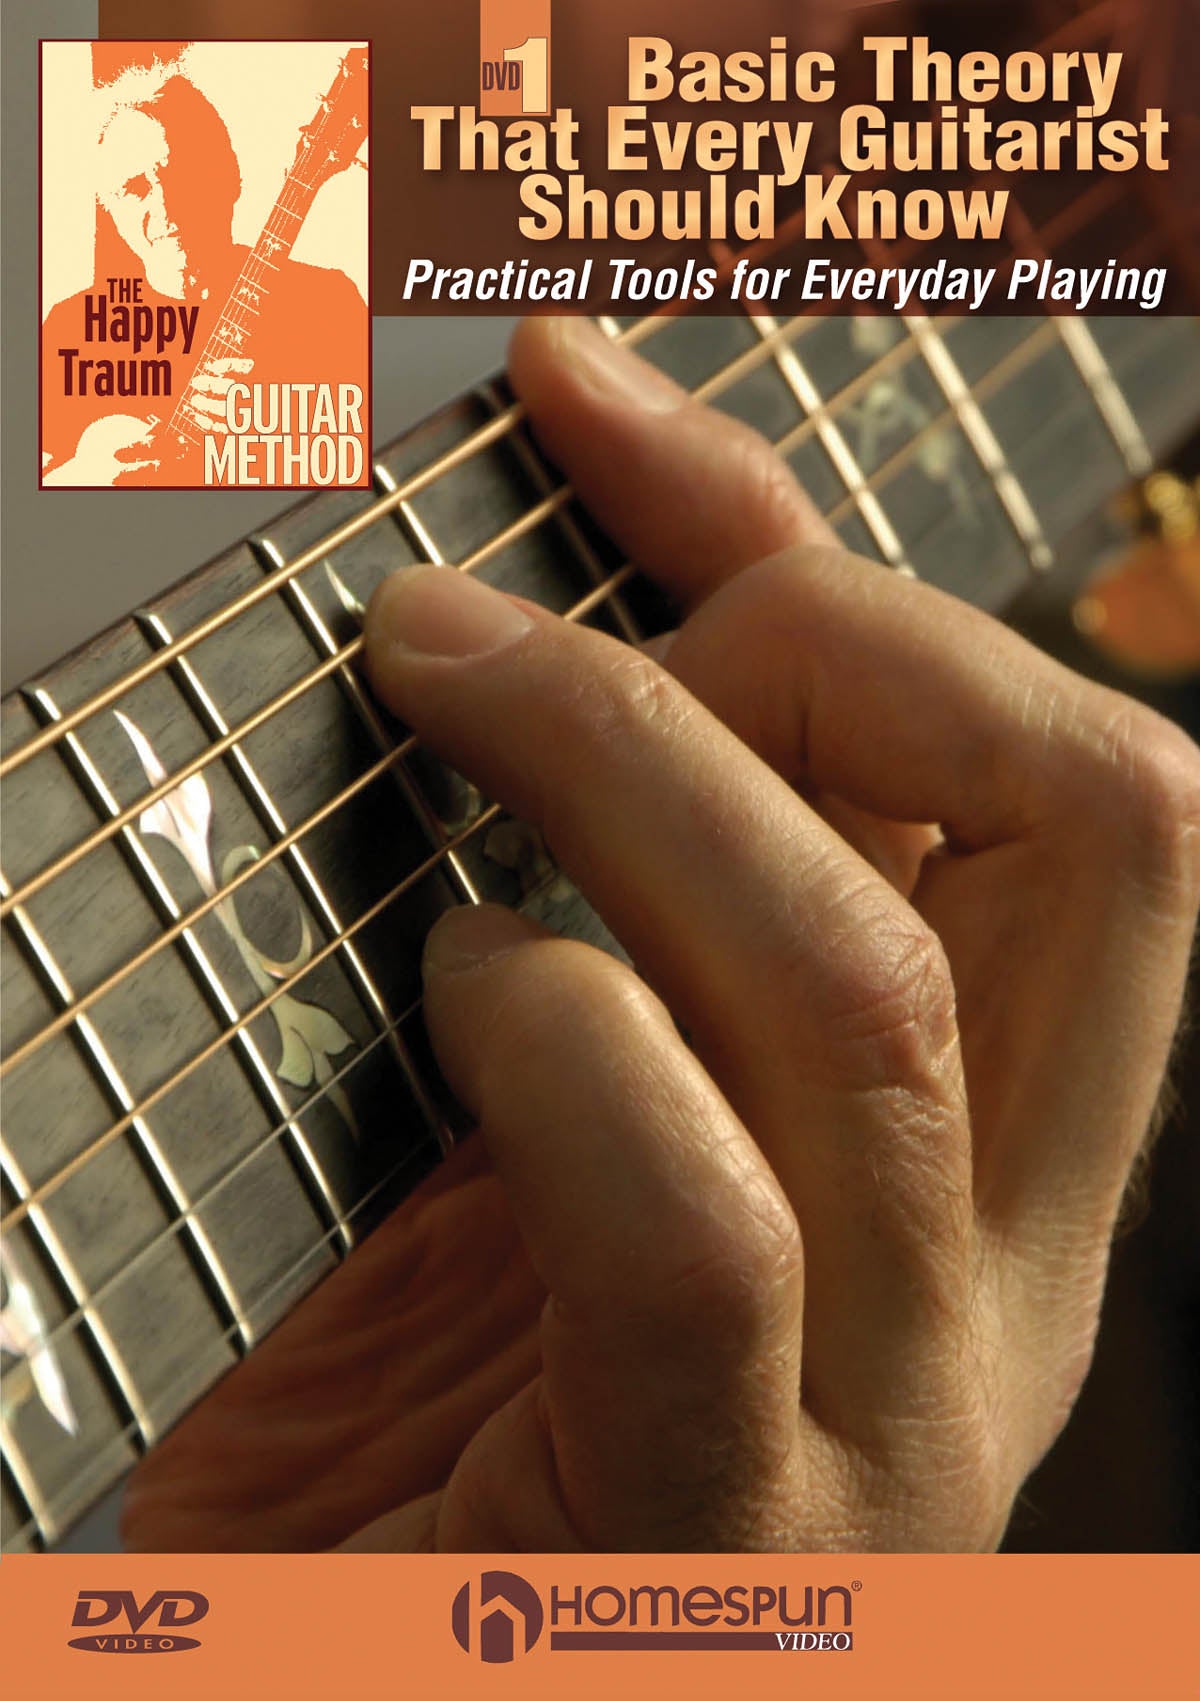 Image 1 of DVD-The Happy Traum Guitar Method: Basic Theory That Every Guitarist Should Know - Vol. 1 - SKU# 300-DVD375 : Product Type Media : Elderly Instruments